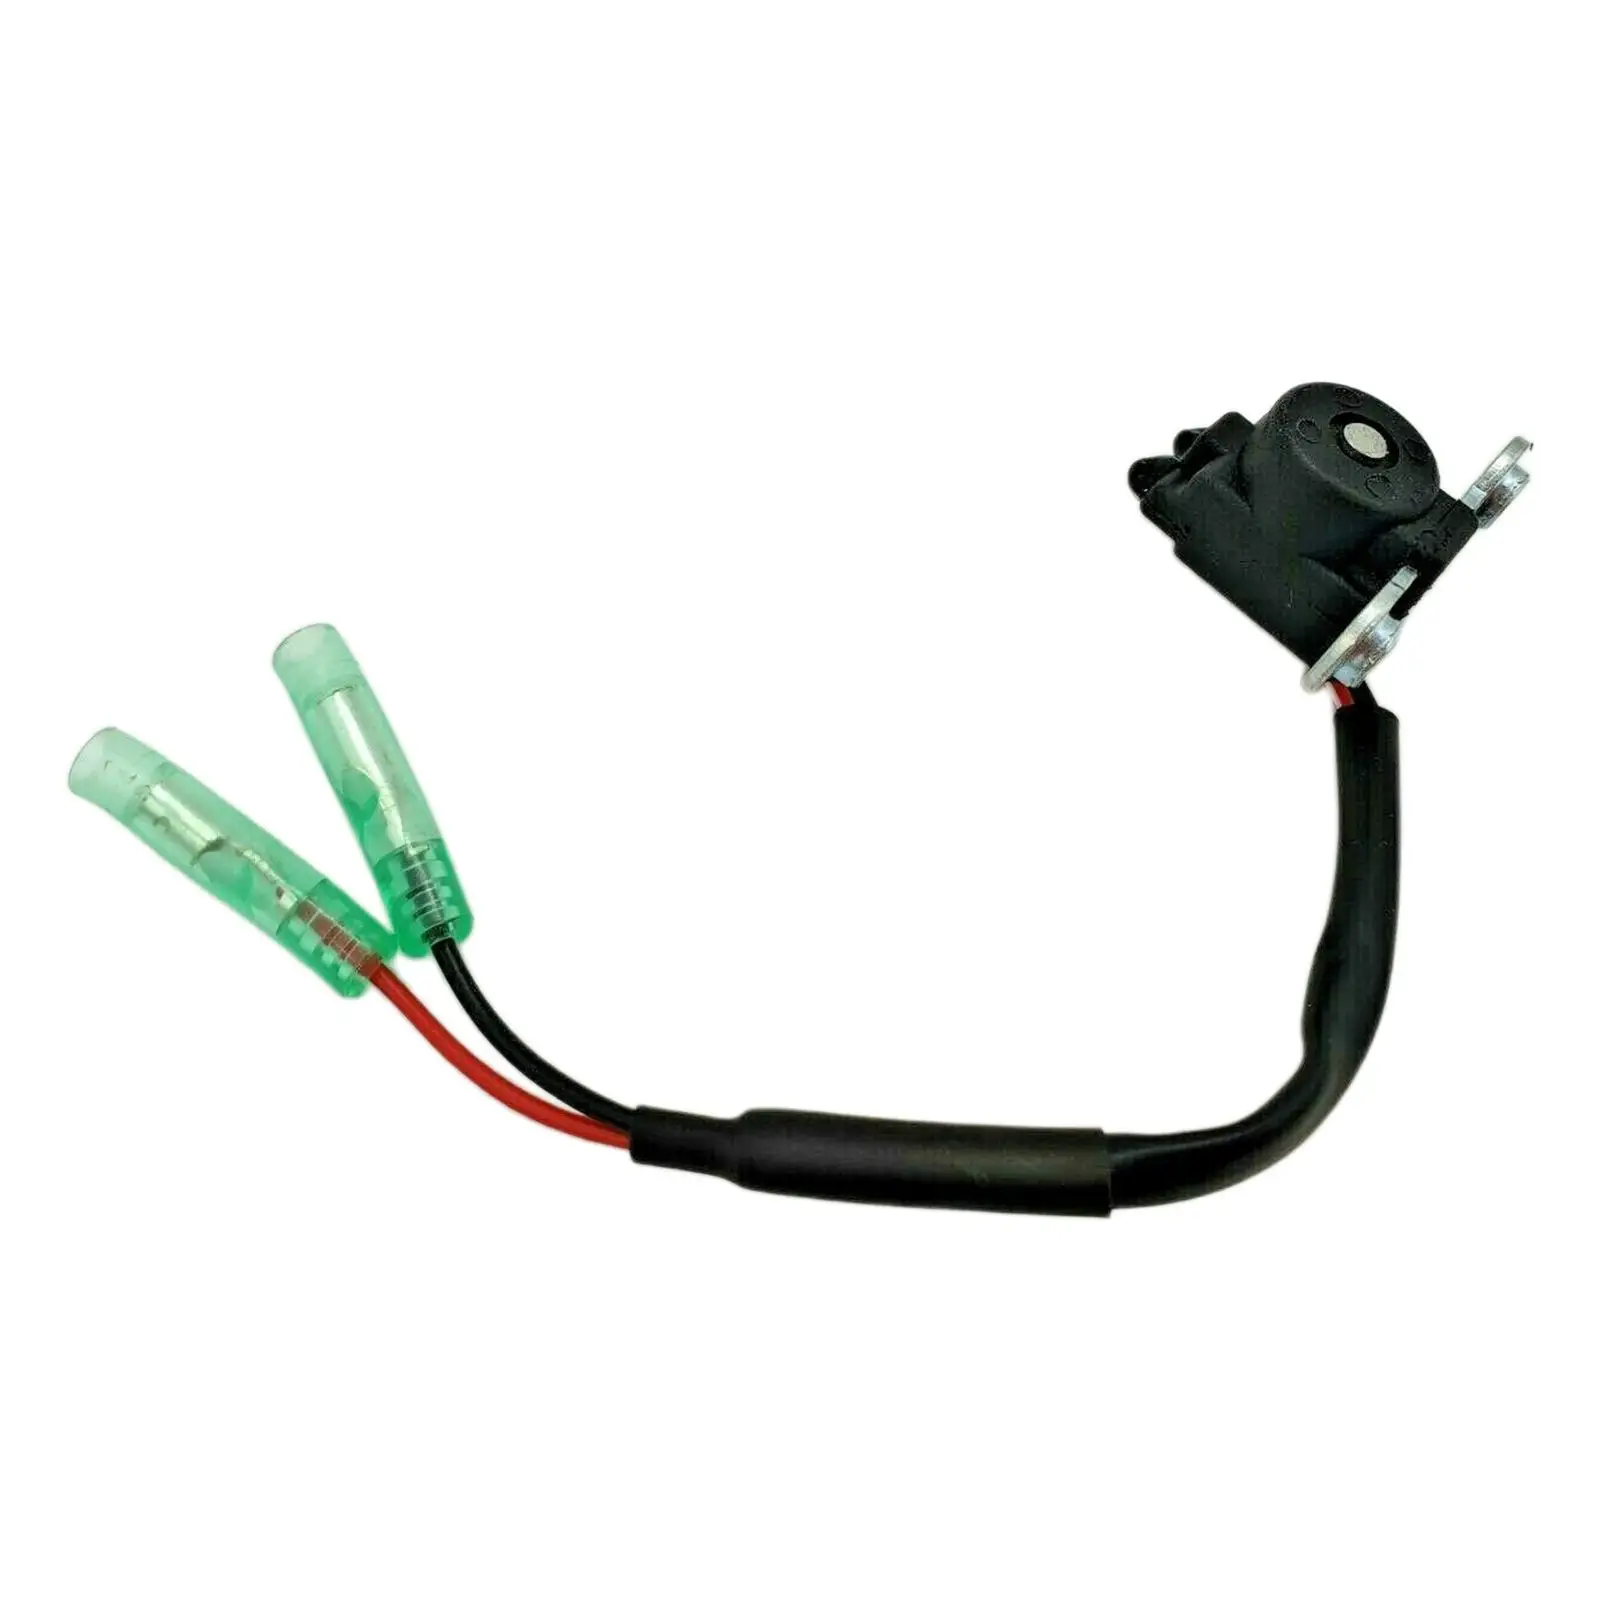 66M-85580-00 Accessories Replacement Plastic 835395 Boat Parts Black Coil Pulser for Yamaha 15 HP , 4 Stroke , 1998-2008